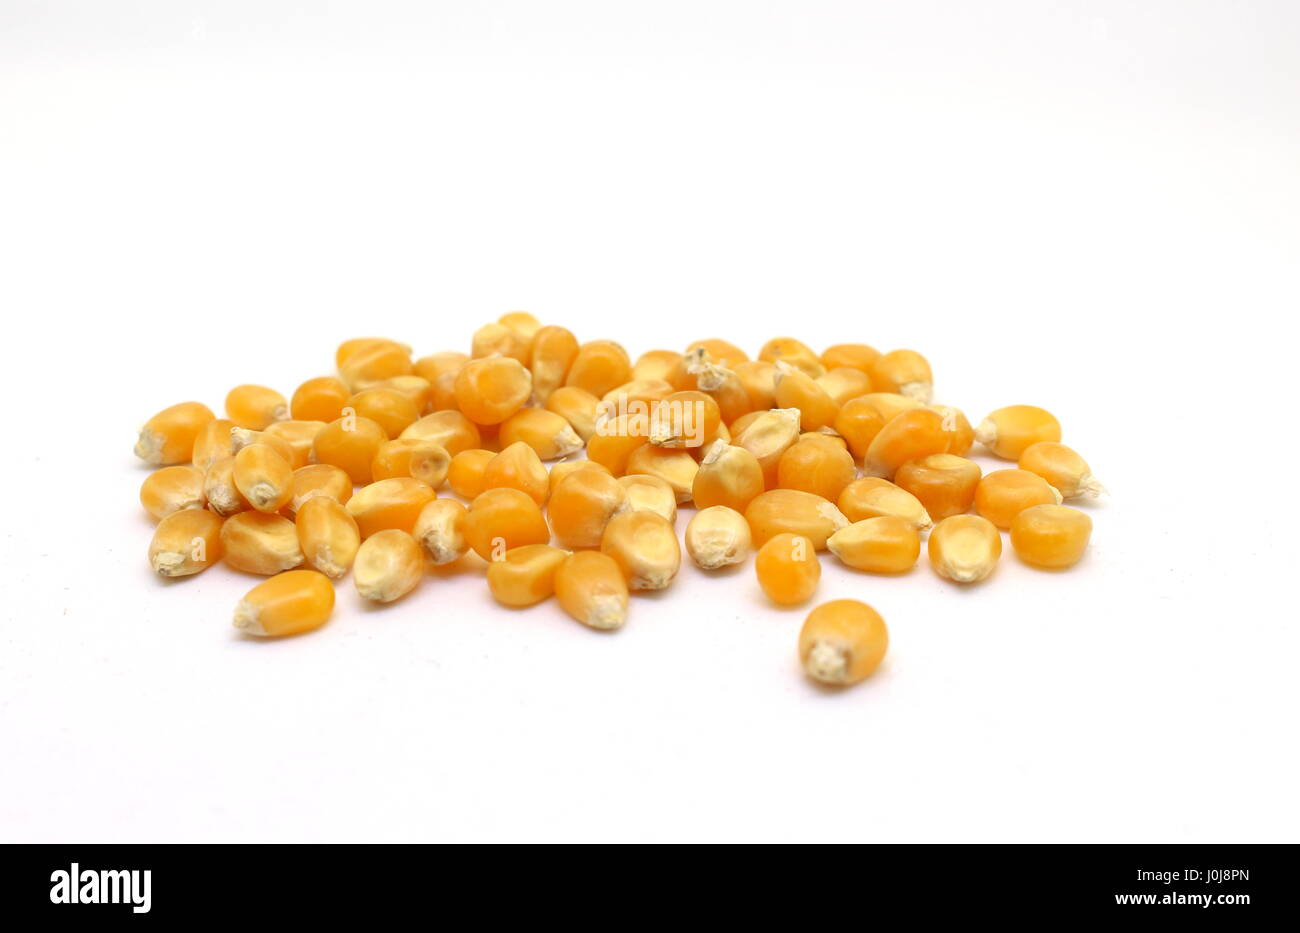 A photograph of a small mound of popcorn kernels, isolated on a white background.  Raw ingredient, food. Stock Photo